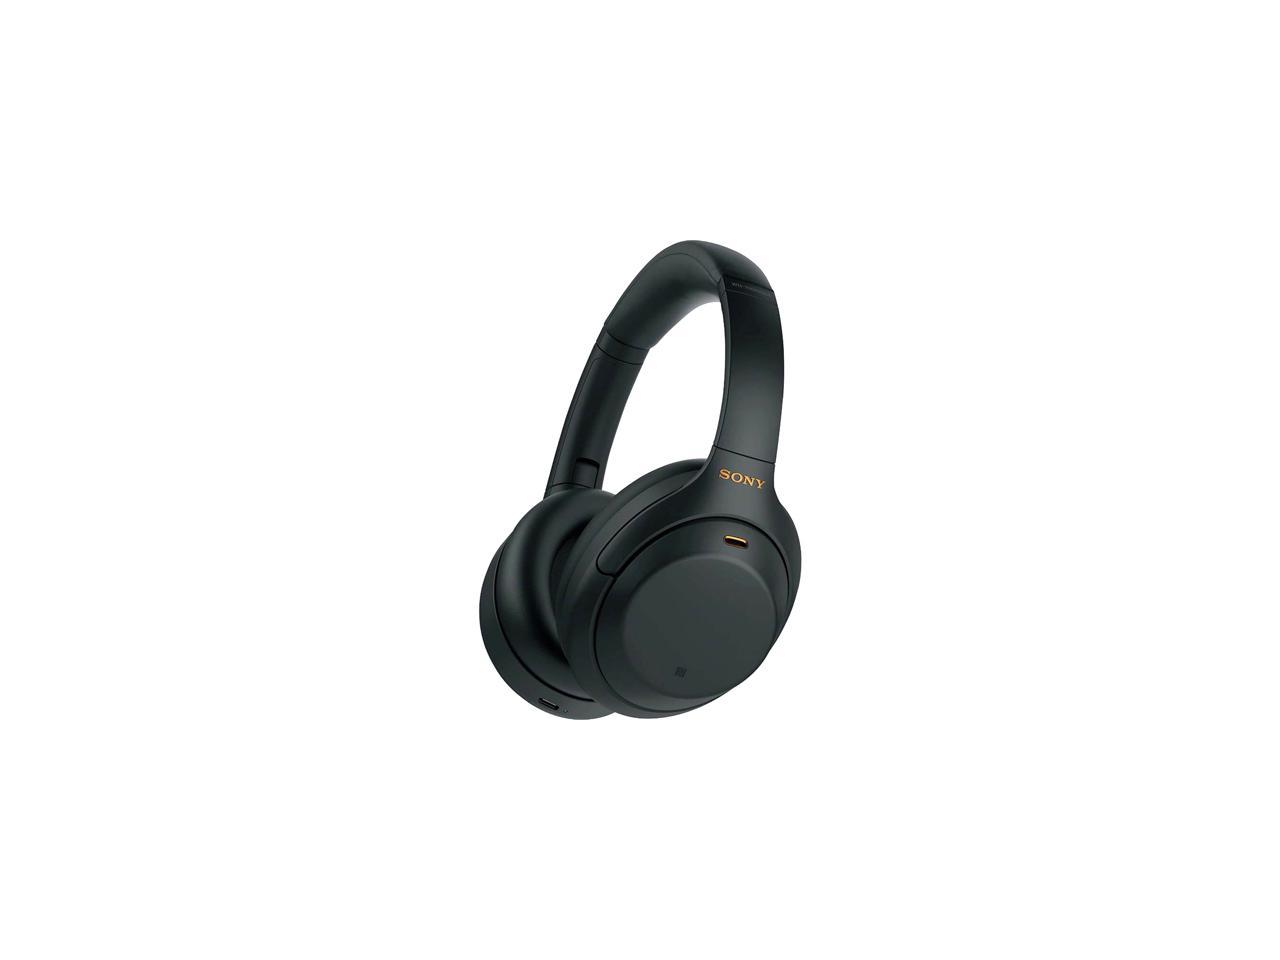 Sony WH-1000XM4 Wireless Noise-Cancelling Over-Ear Headphones (Black)